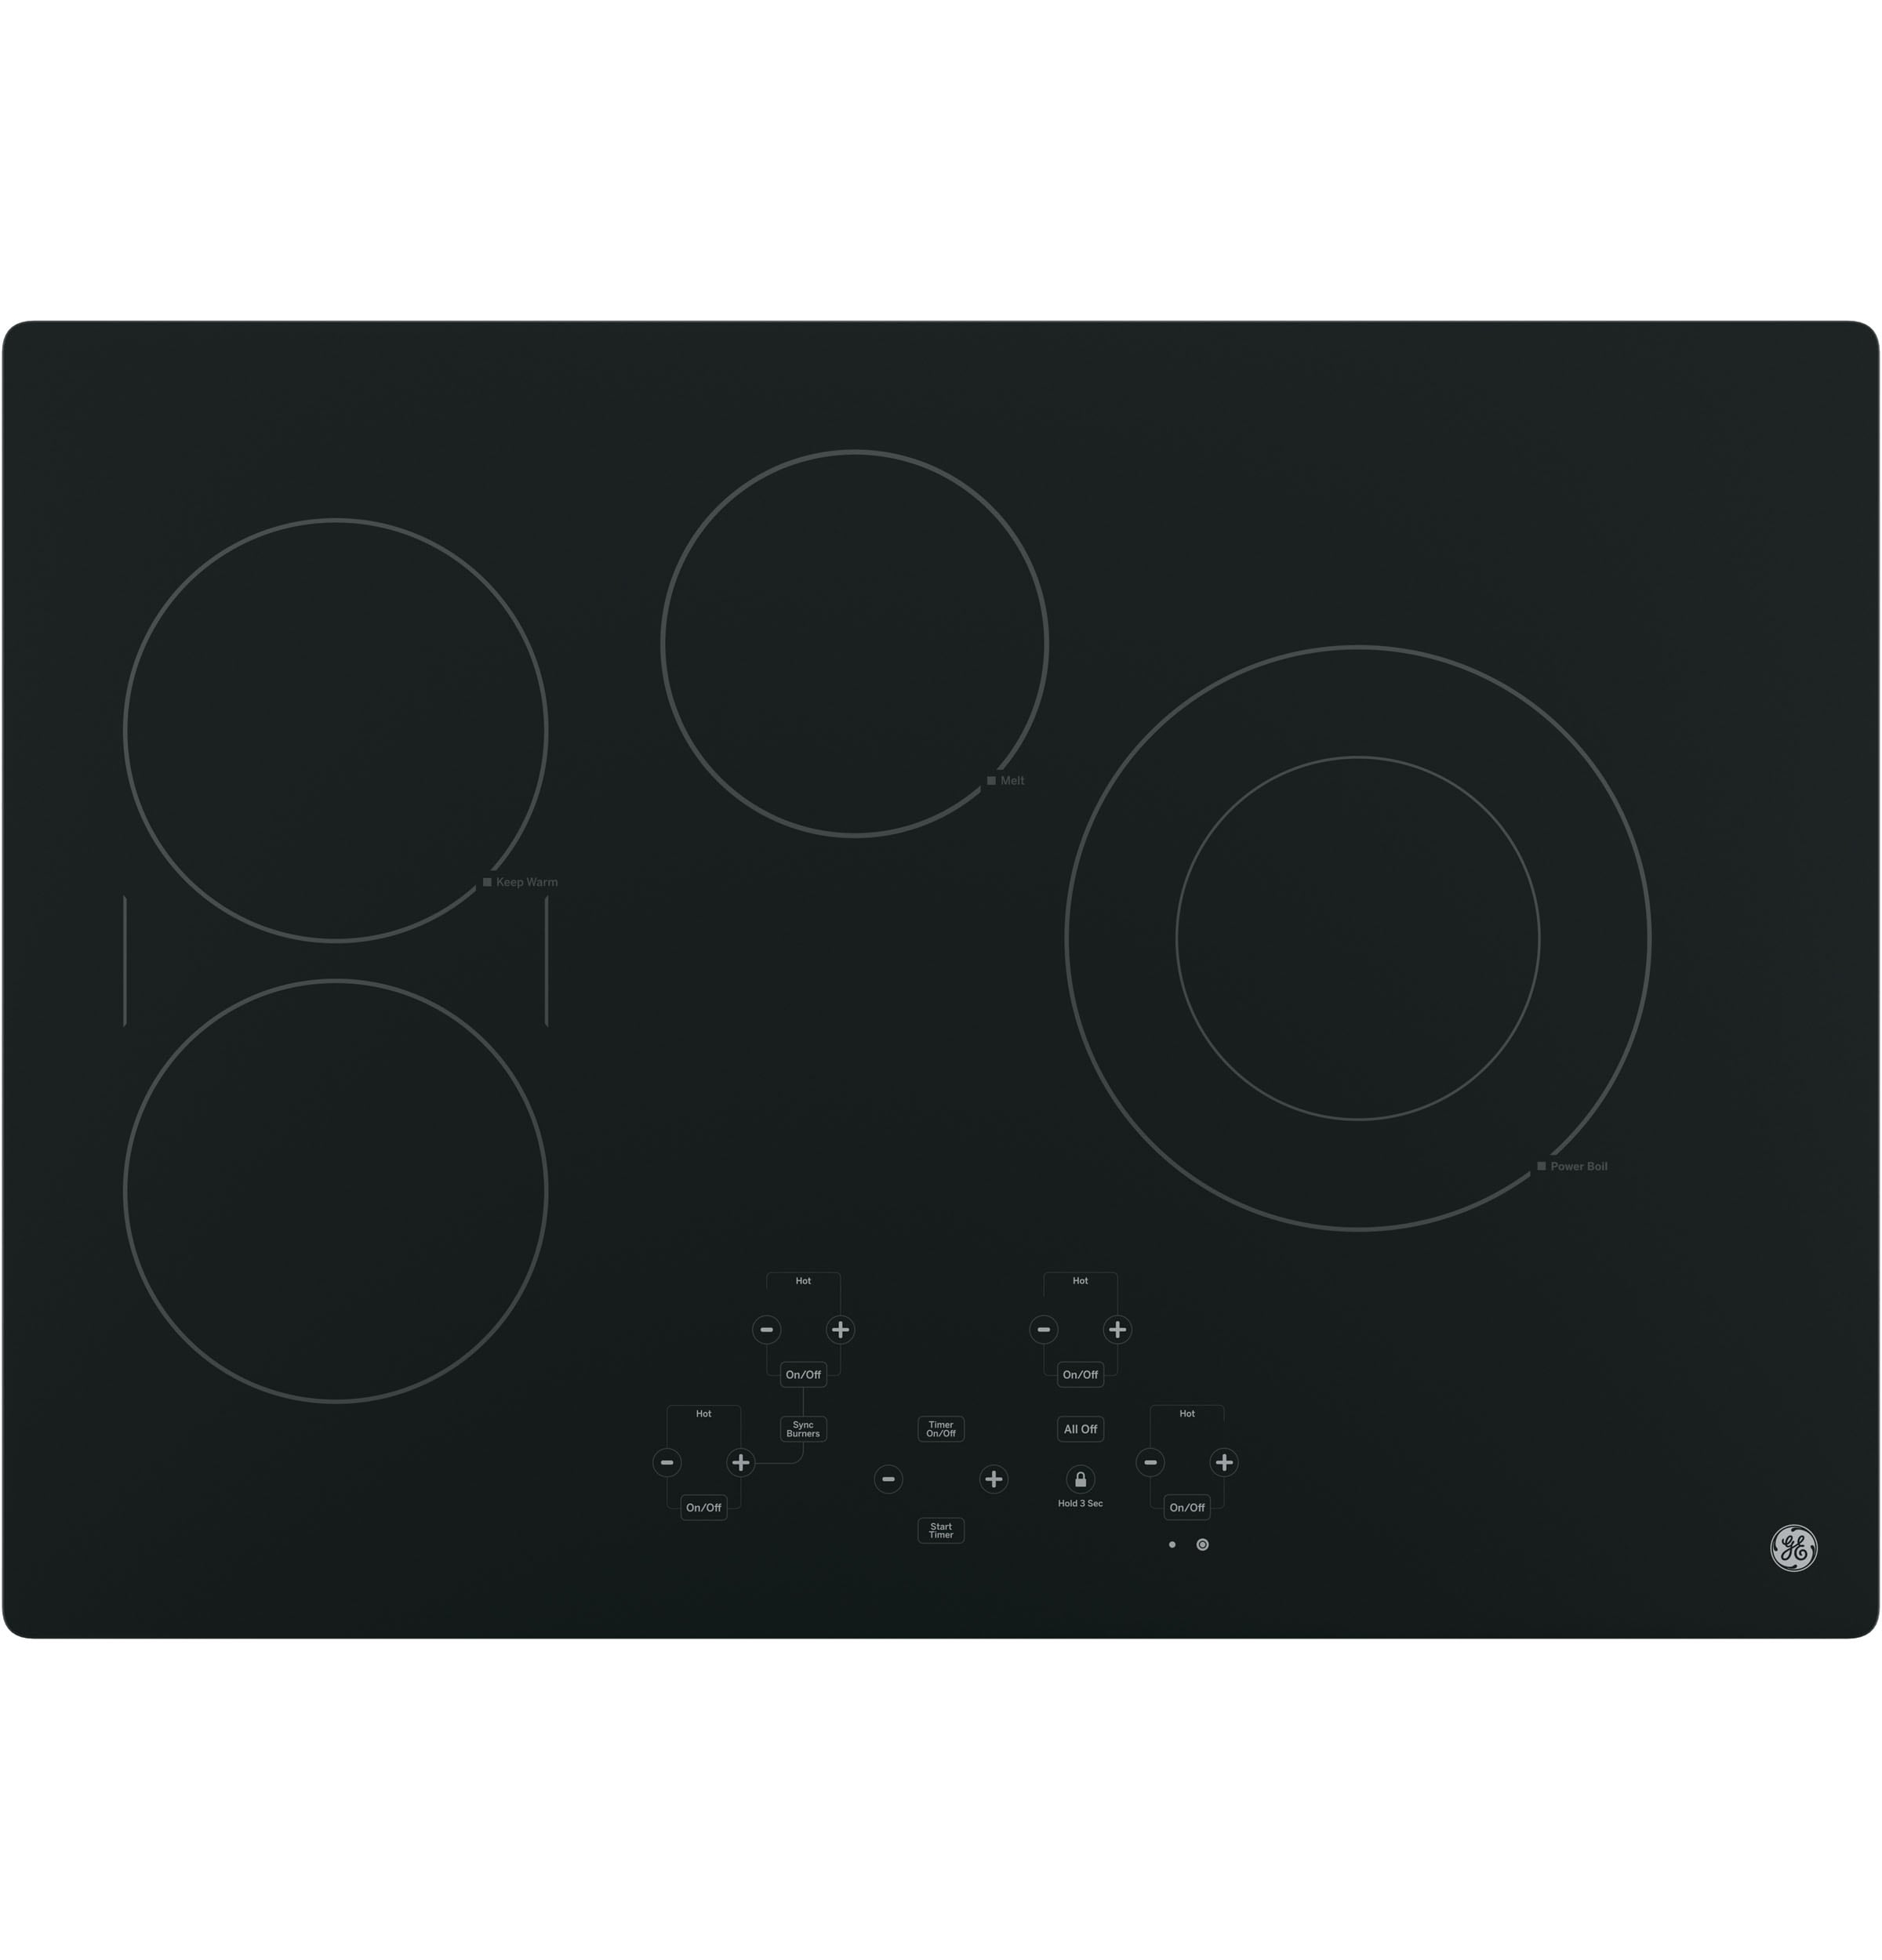 UL Safety Listed Glass Ceramic Surface Hot Indicator ADA Compliant Keep Warm Zone GE JP3036TLWW 36 Electric Cooktop with 5 Elements Smoothtop Style 